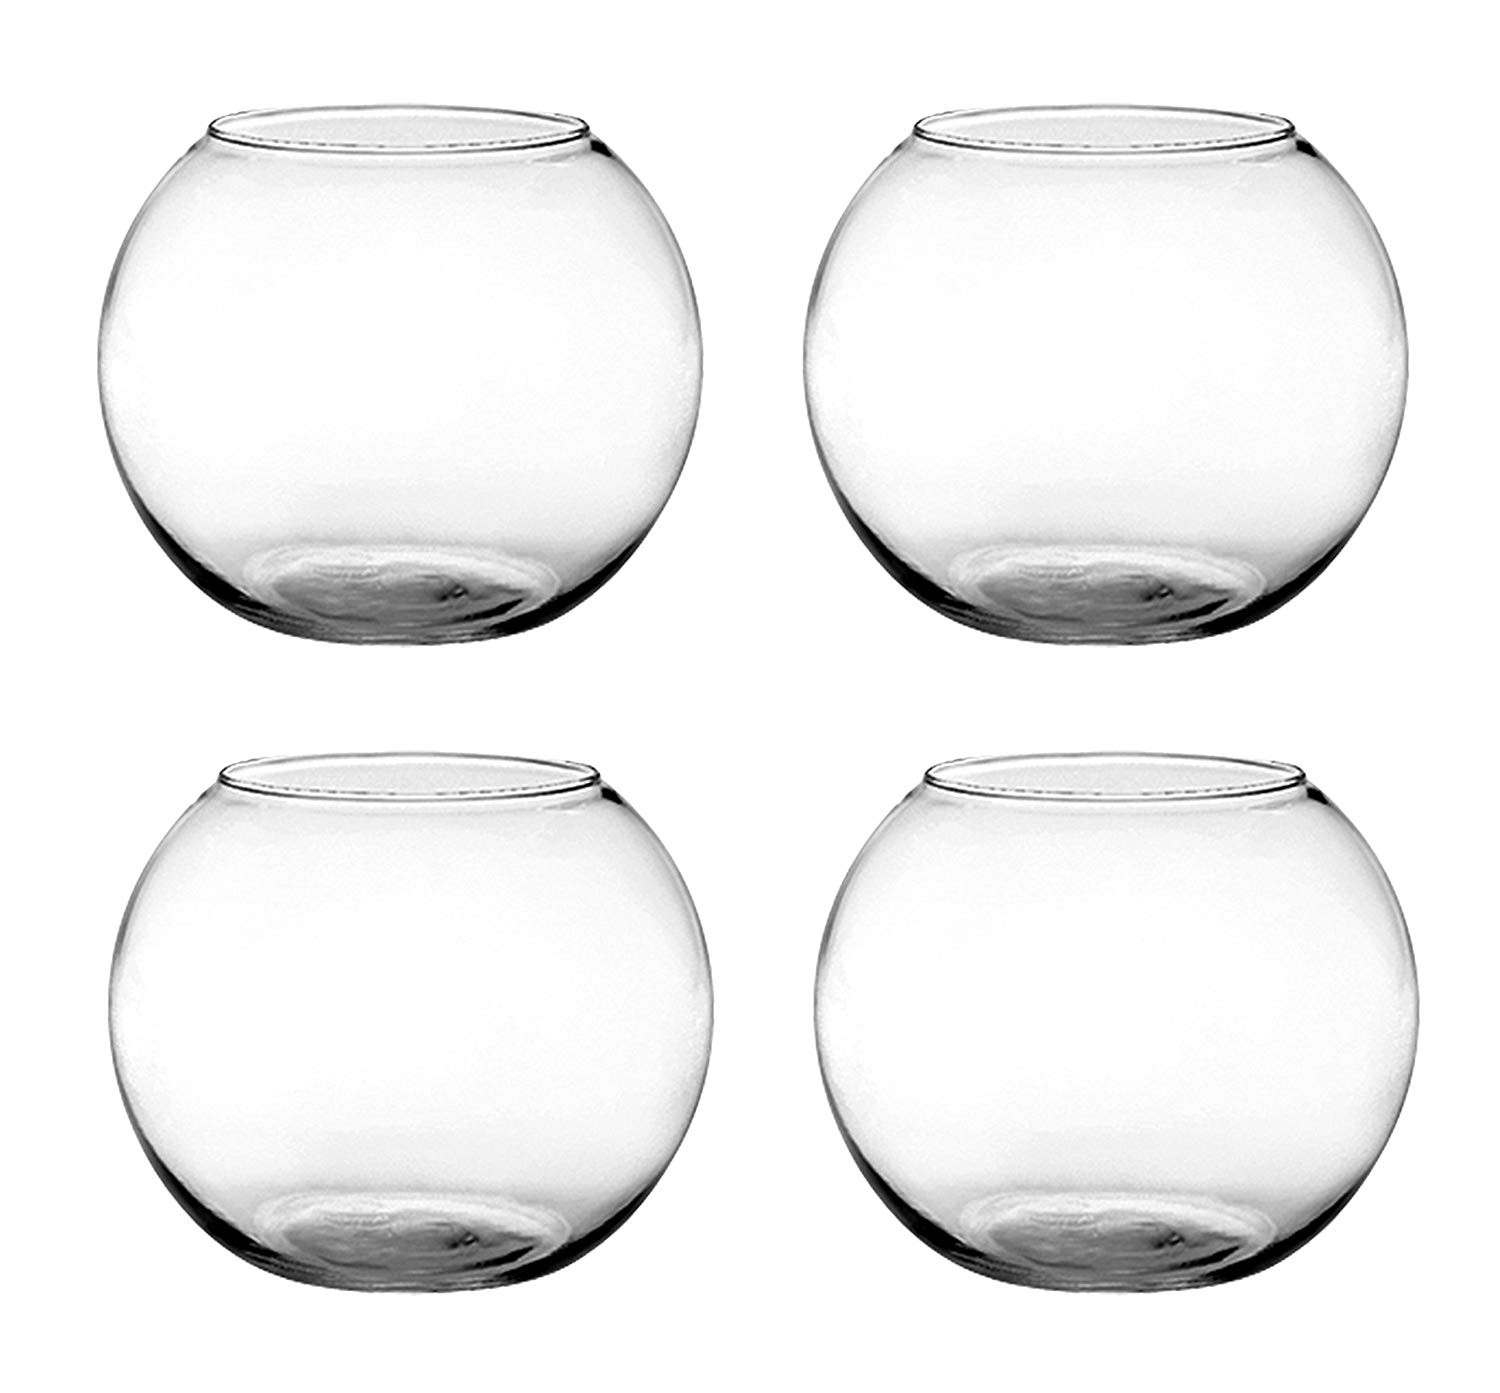 18 Fantastic 12 Inch Glass Vases Cheap 2024 free download 12 inch glass vases cheap of amazon com set of 4 syndicate sales 6 inches clear rose bowl throughout amazon com set of 4 syndicate sales 6 inches clear rose bowl bundled by maven gifts garde